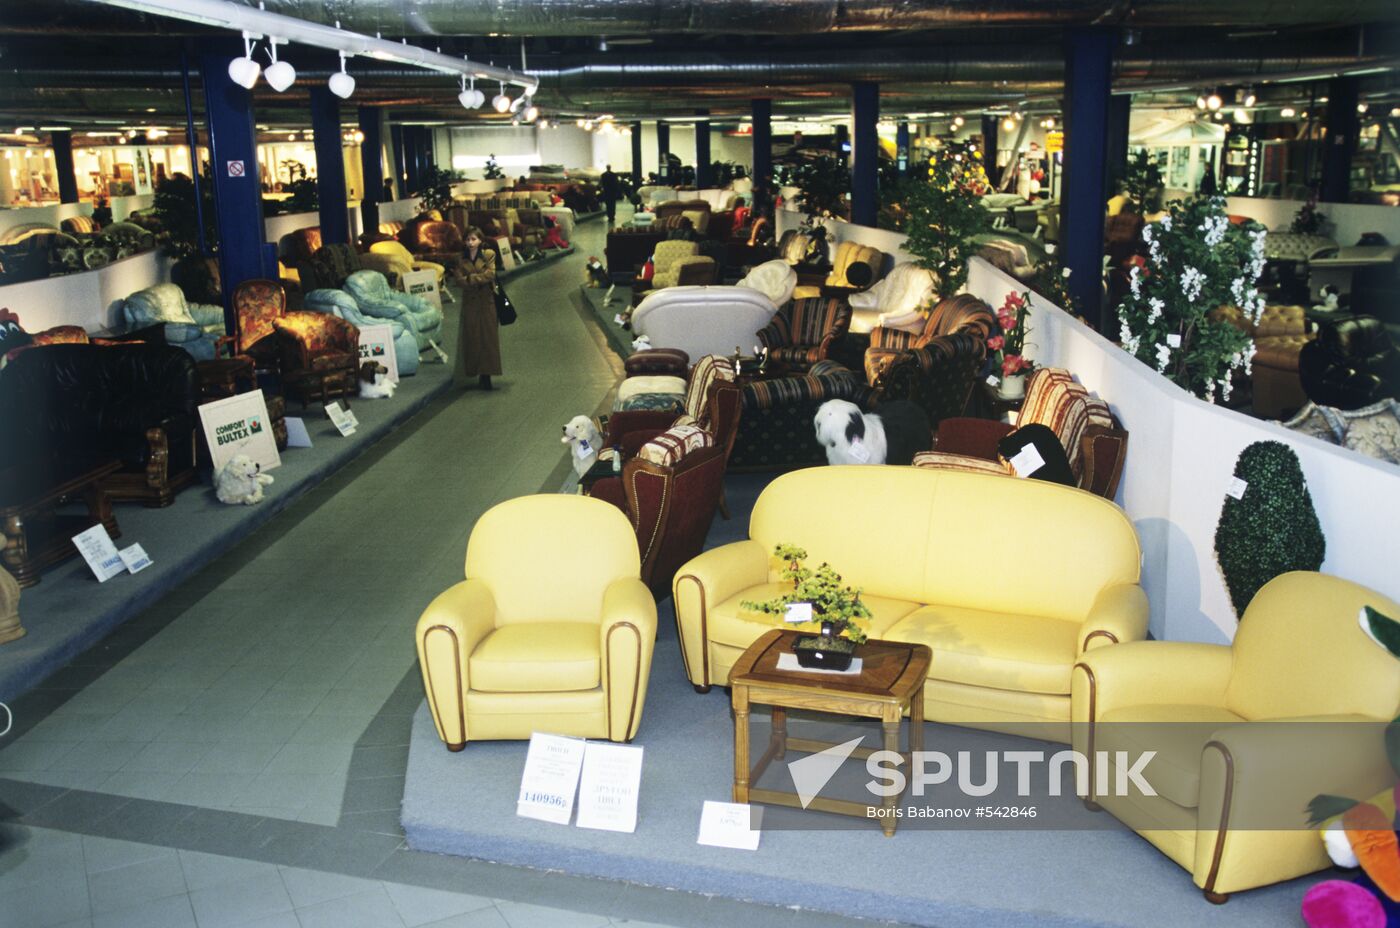 Sales area of furniture store “Grand”